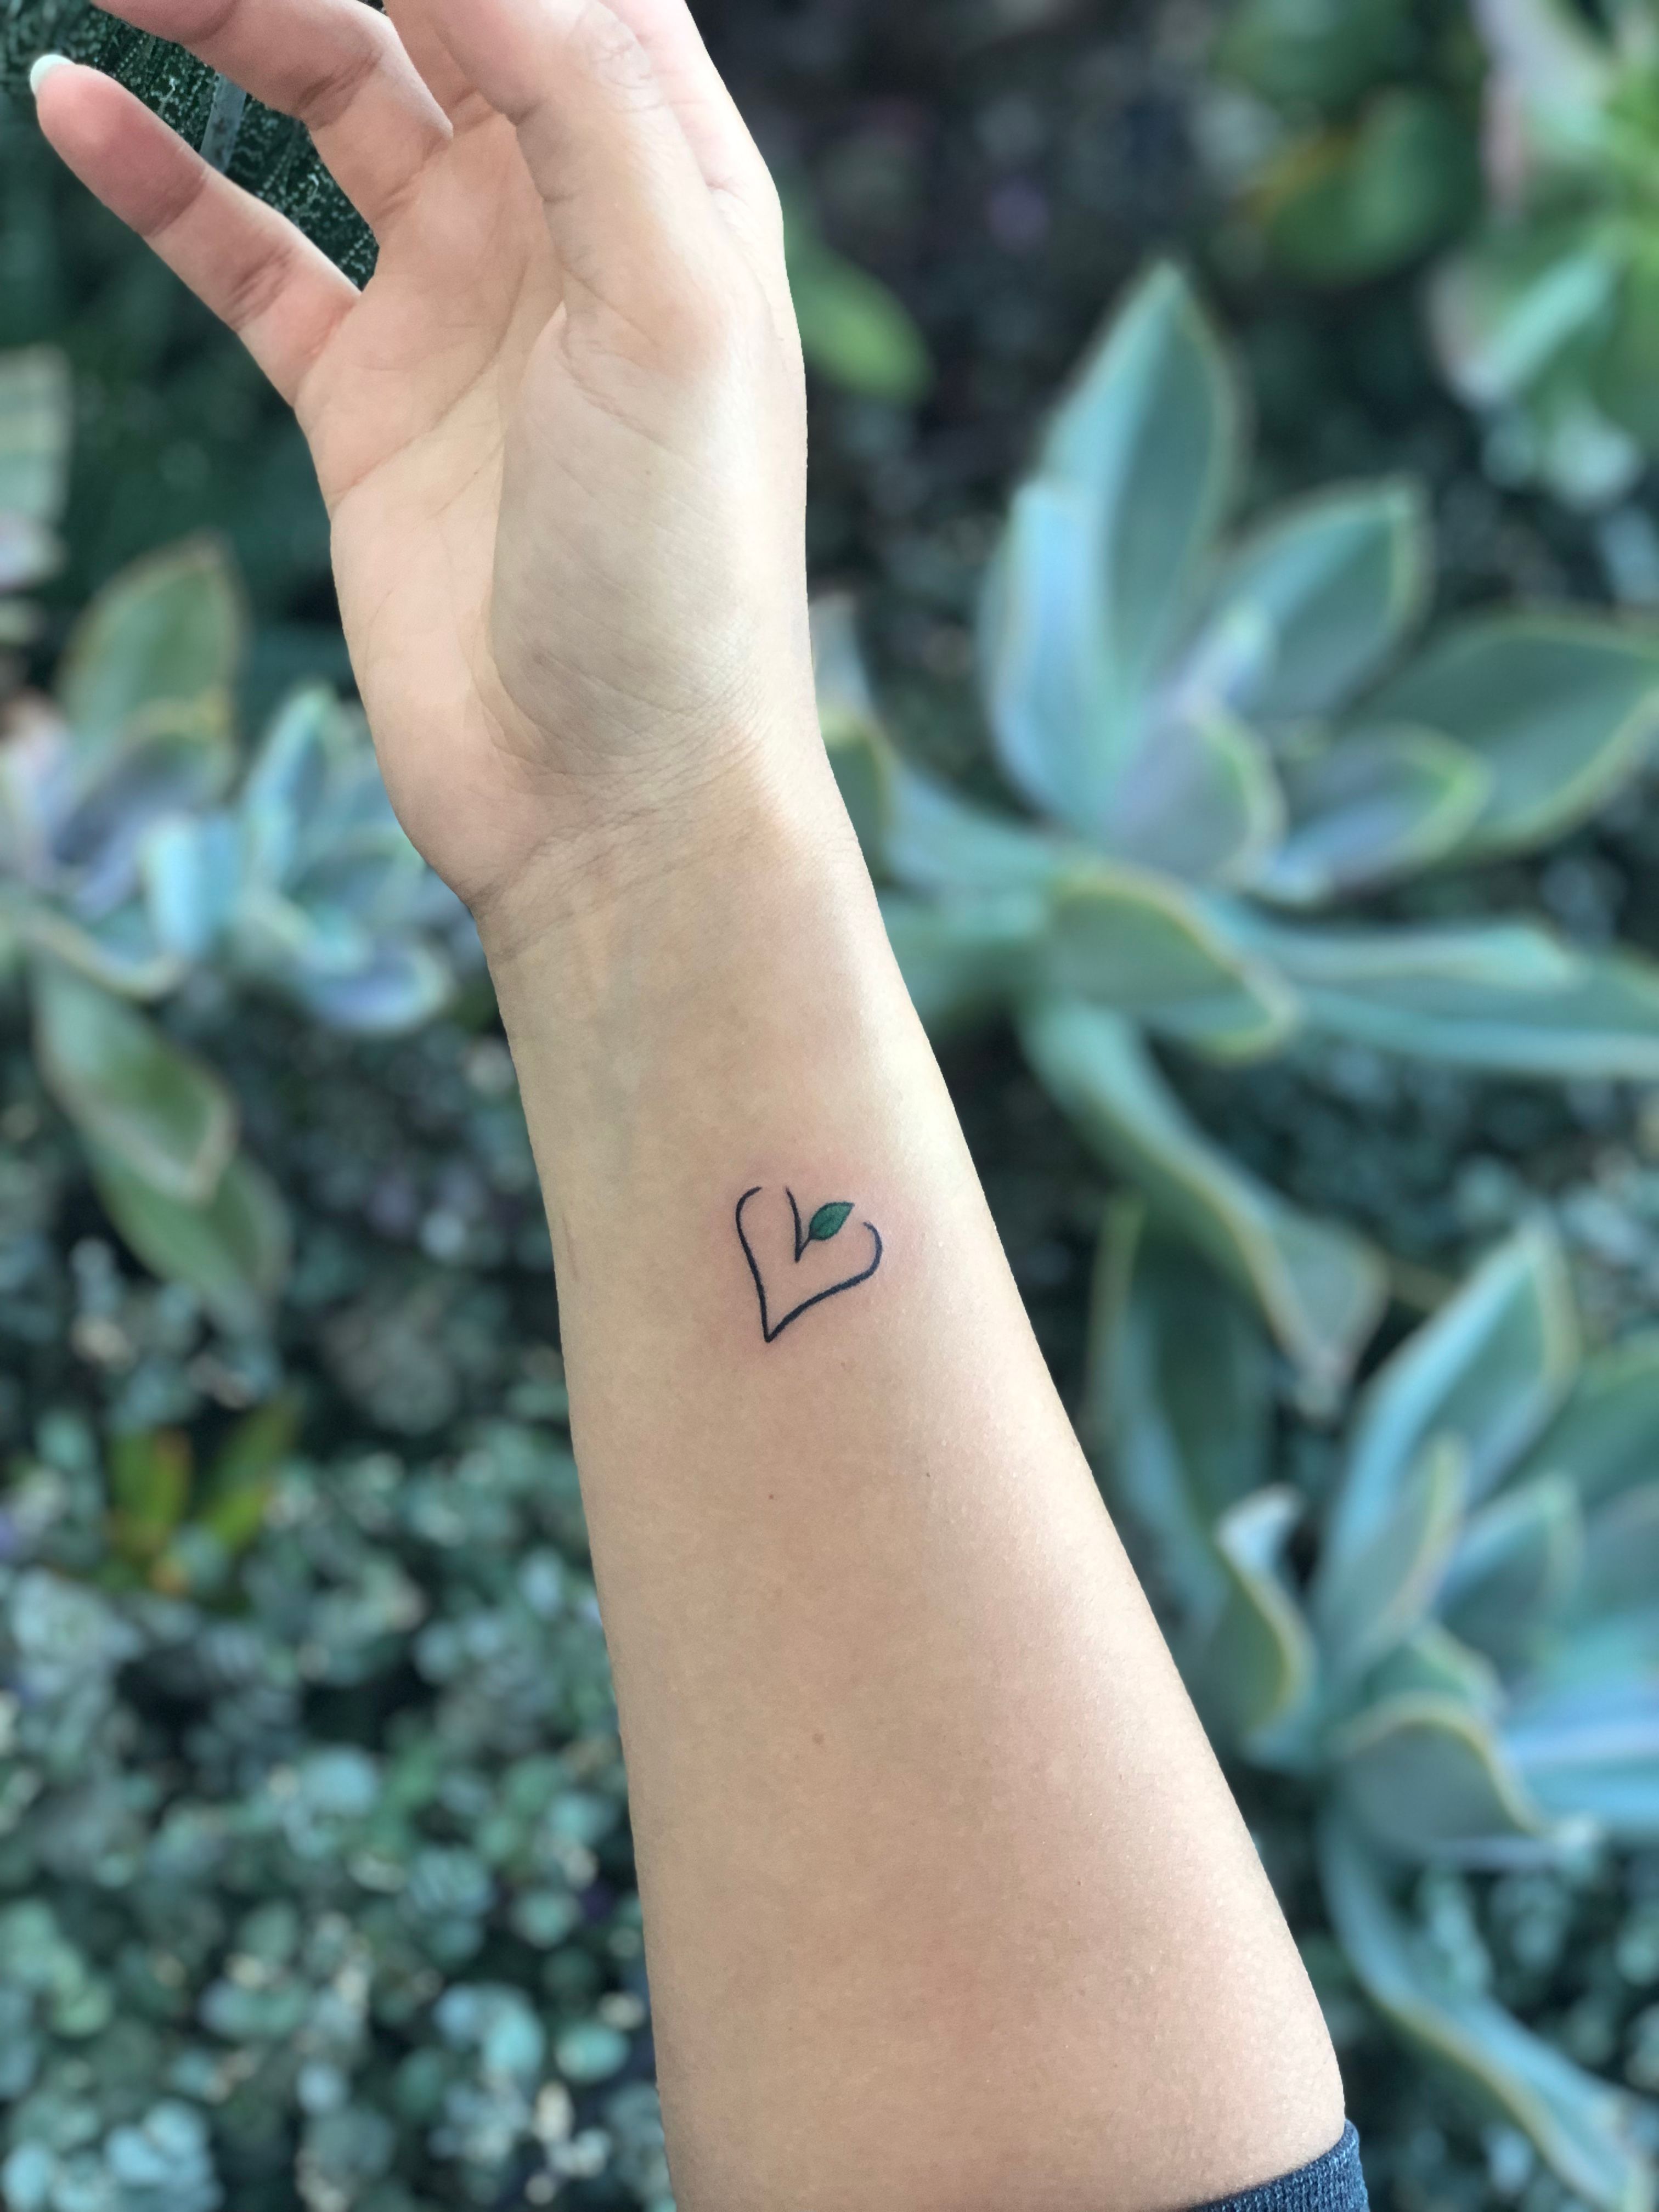 New] The 10 Best Tattoo Ideas Today (with Pictures) - Vegan tattoo fineline  #bekindtoeverykind #vegantattoo… | Vegan tattoo, Tattoo designs, Vegetarian  tattoo